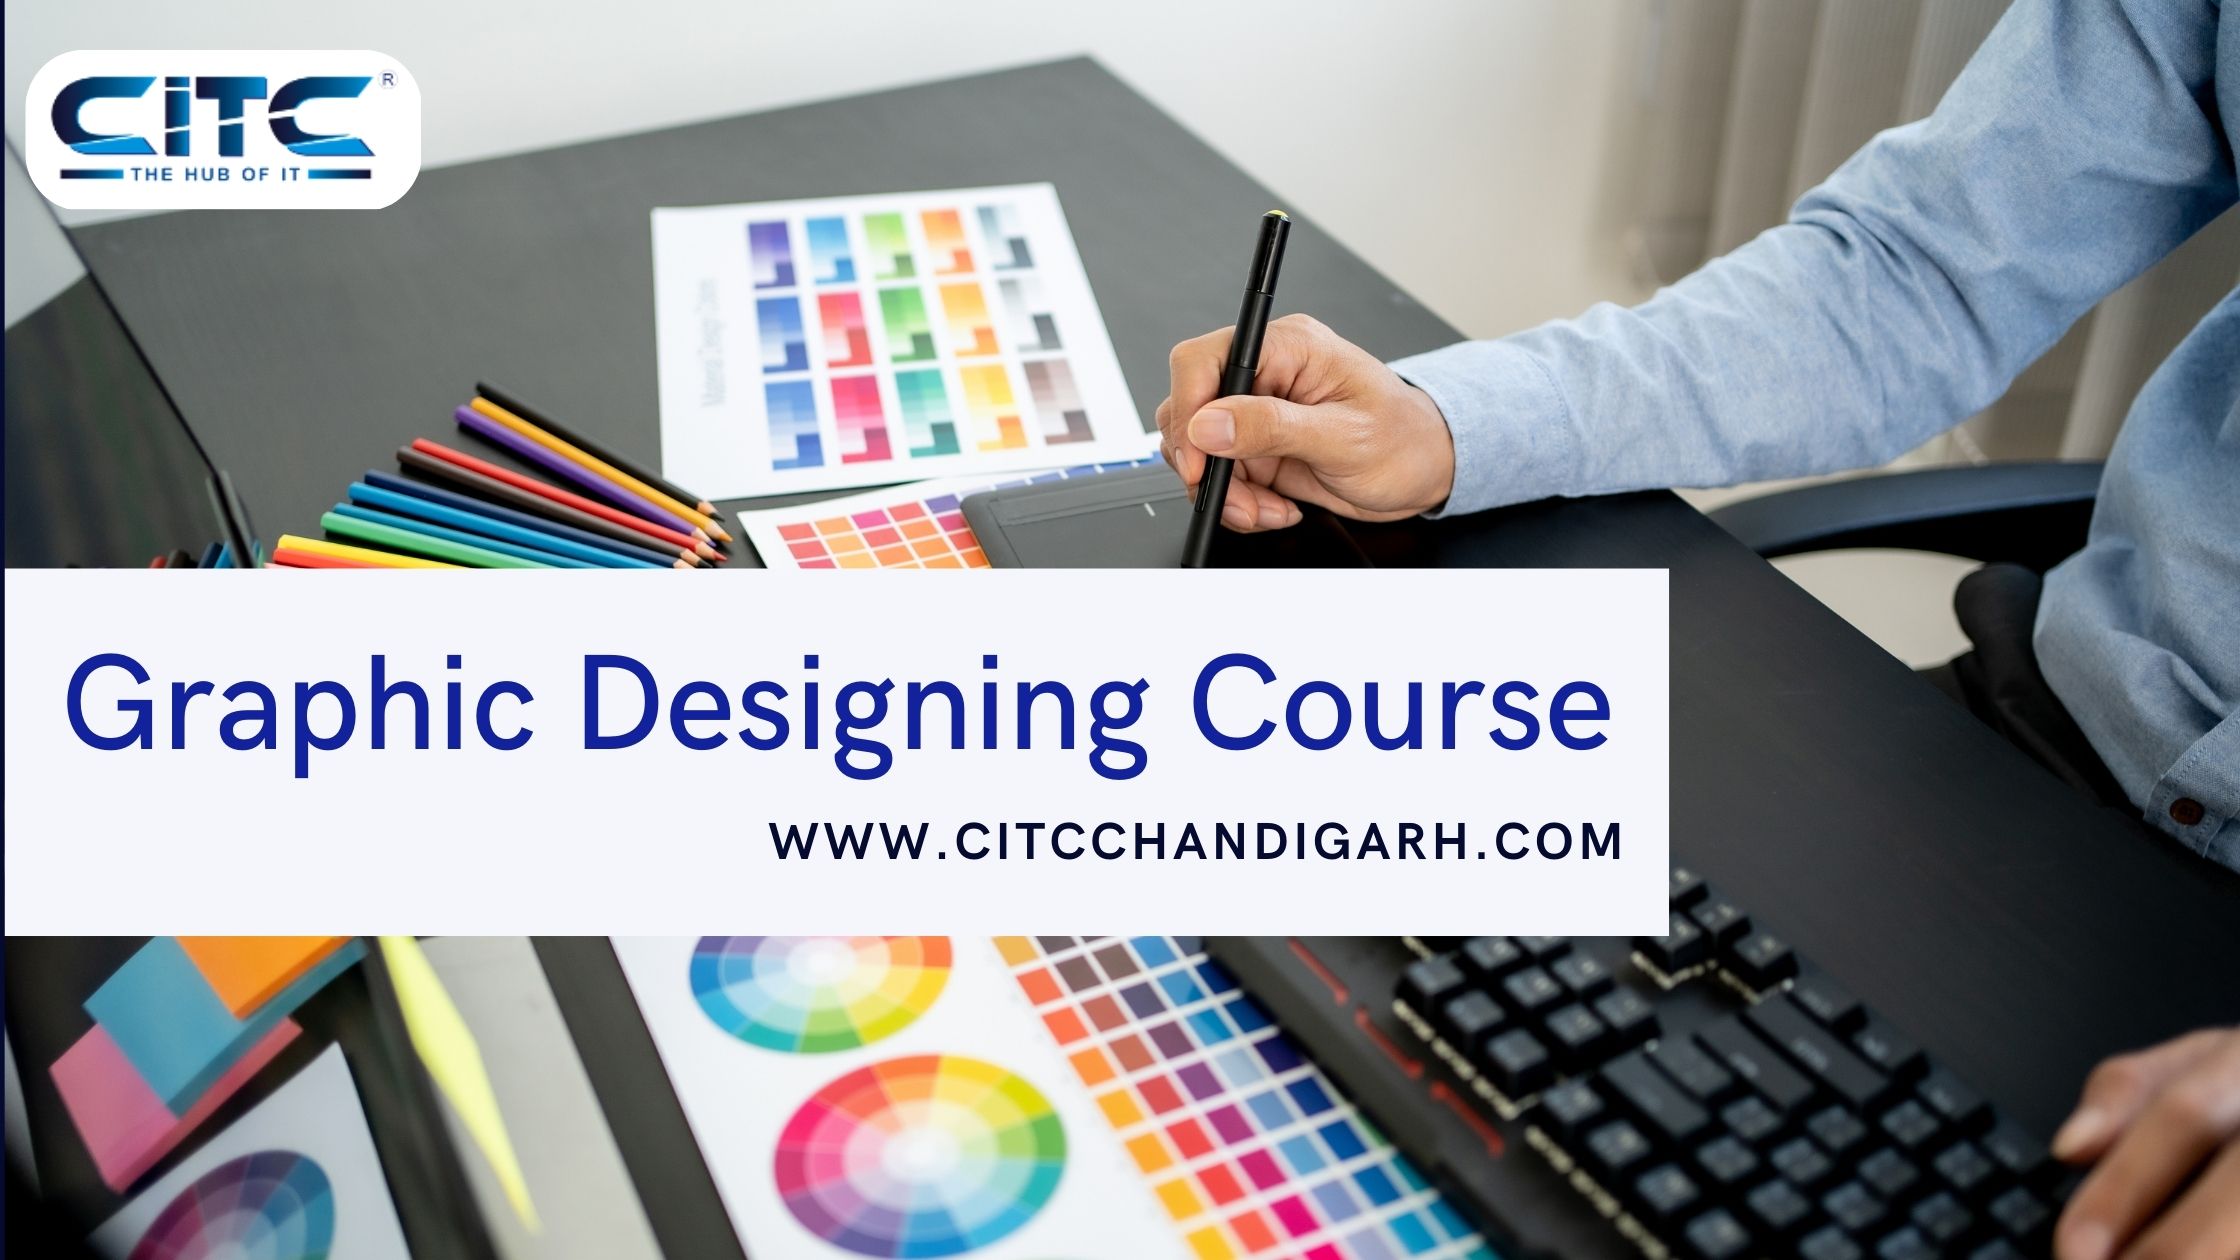 Certification Course in Graphic Designing with CITC